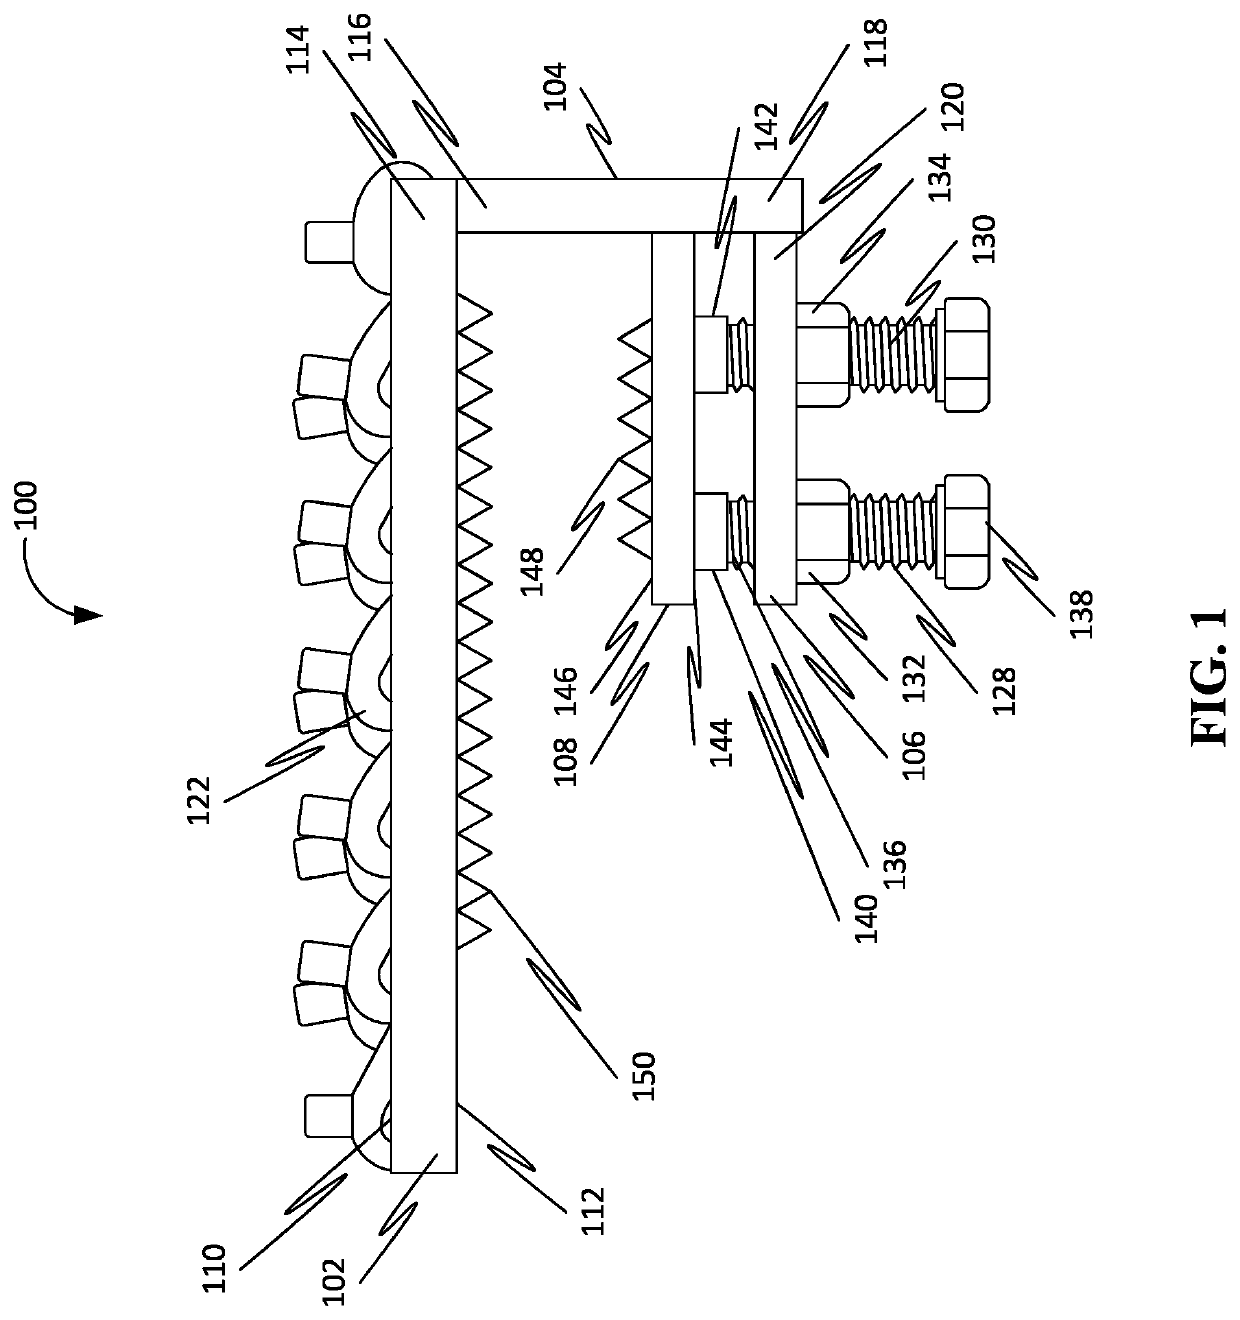 Methods, apparatuses, and devices for providing traction to a tracked vehicle